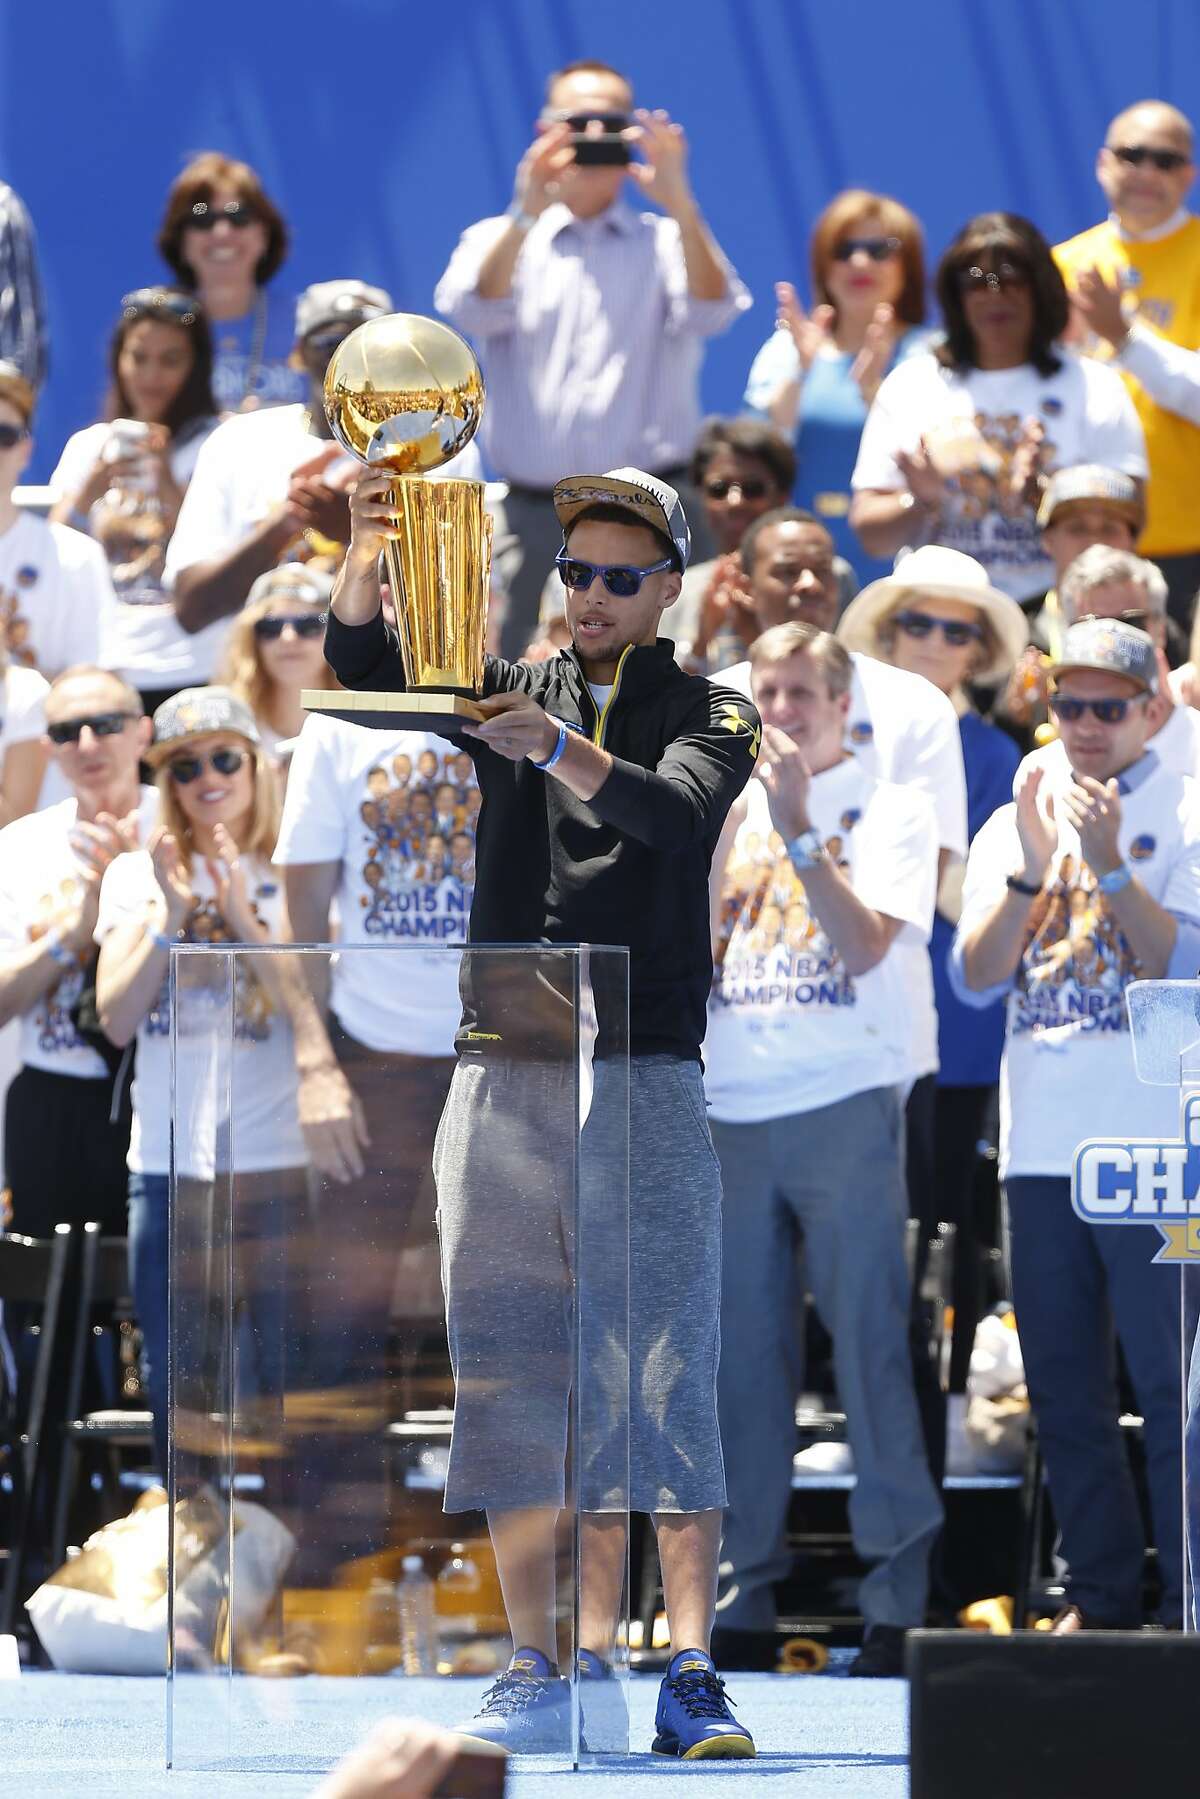 Golden State Warriors' Stephen Curry hoists the trophy after being introduced during the NBA Champions rally at the Henry J. Kaiser Convention Center on Friday, June 19, 2015 in Oakland, Calif.